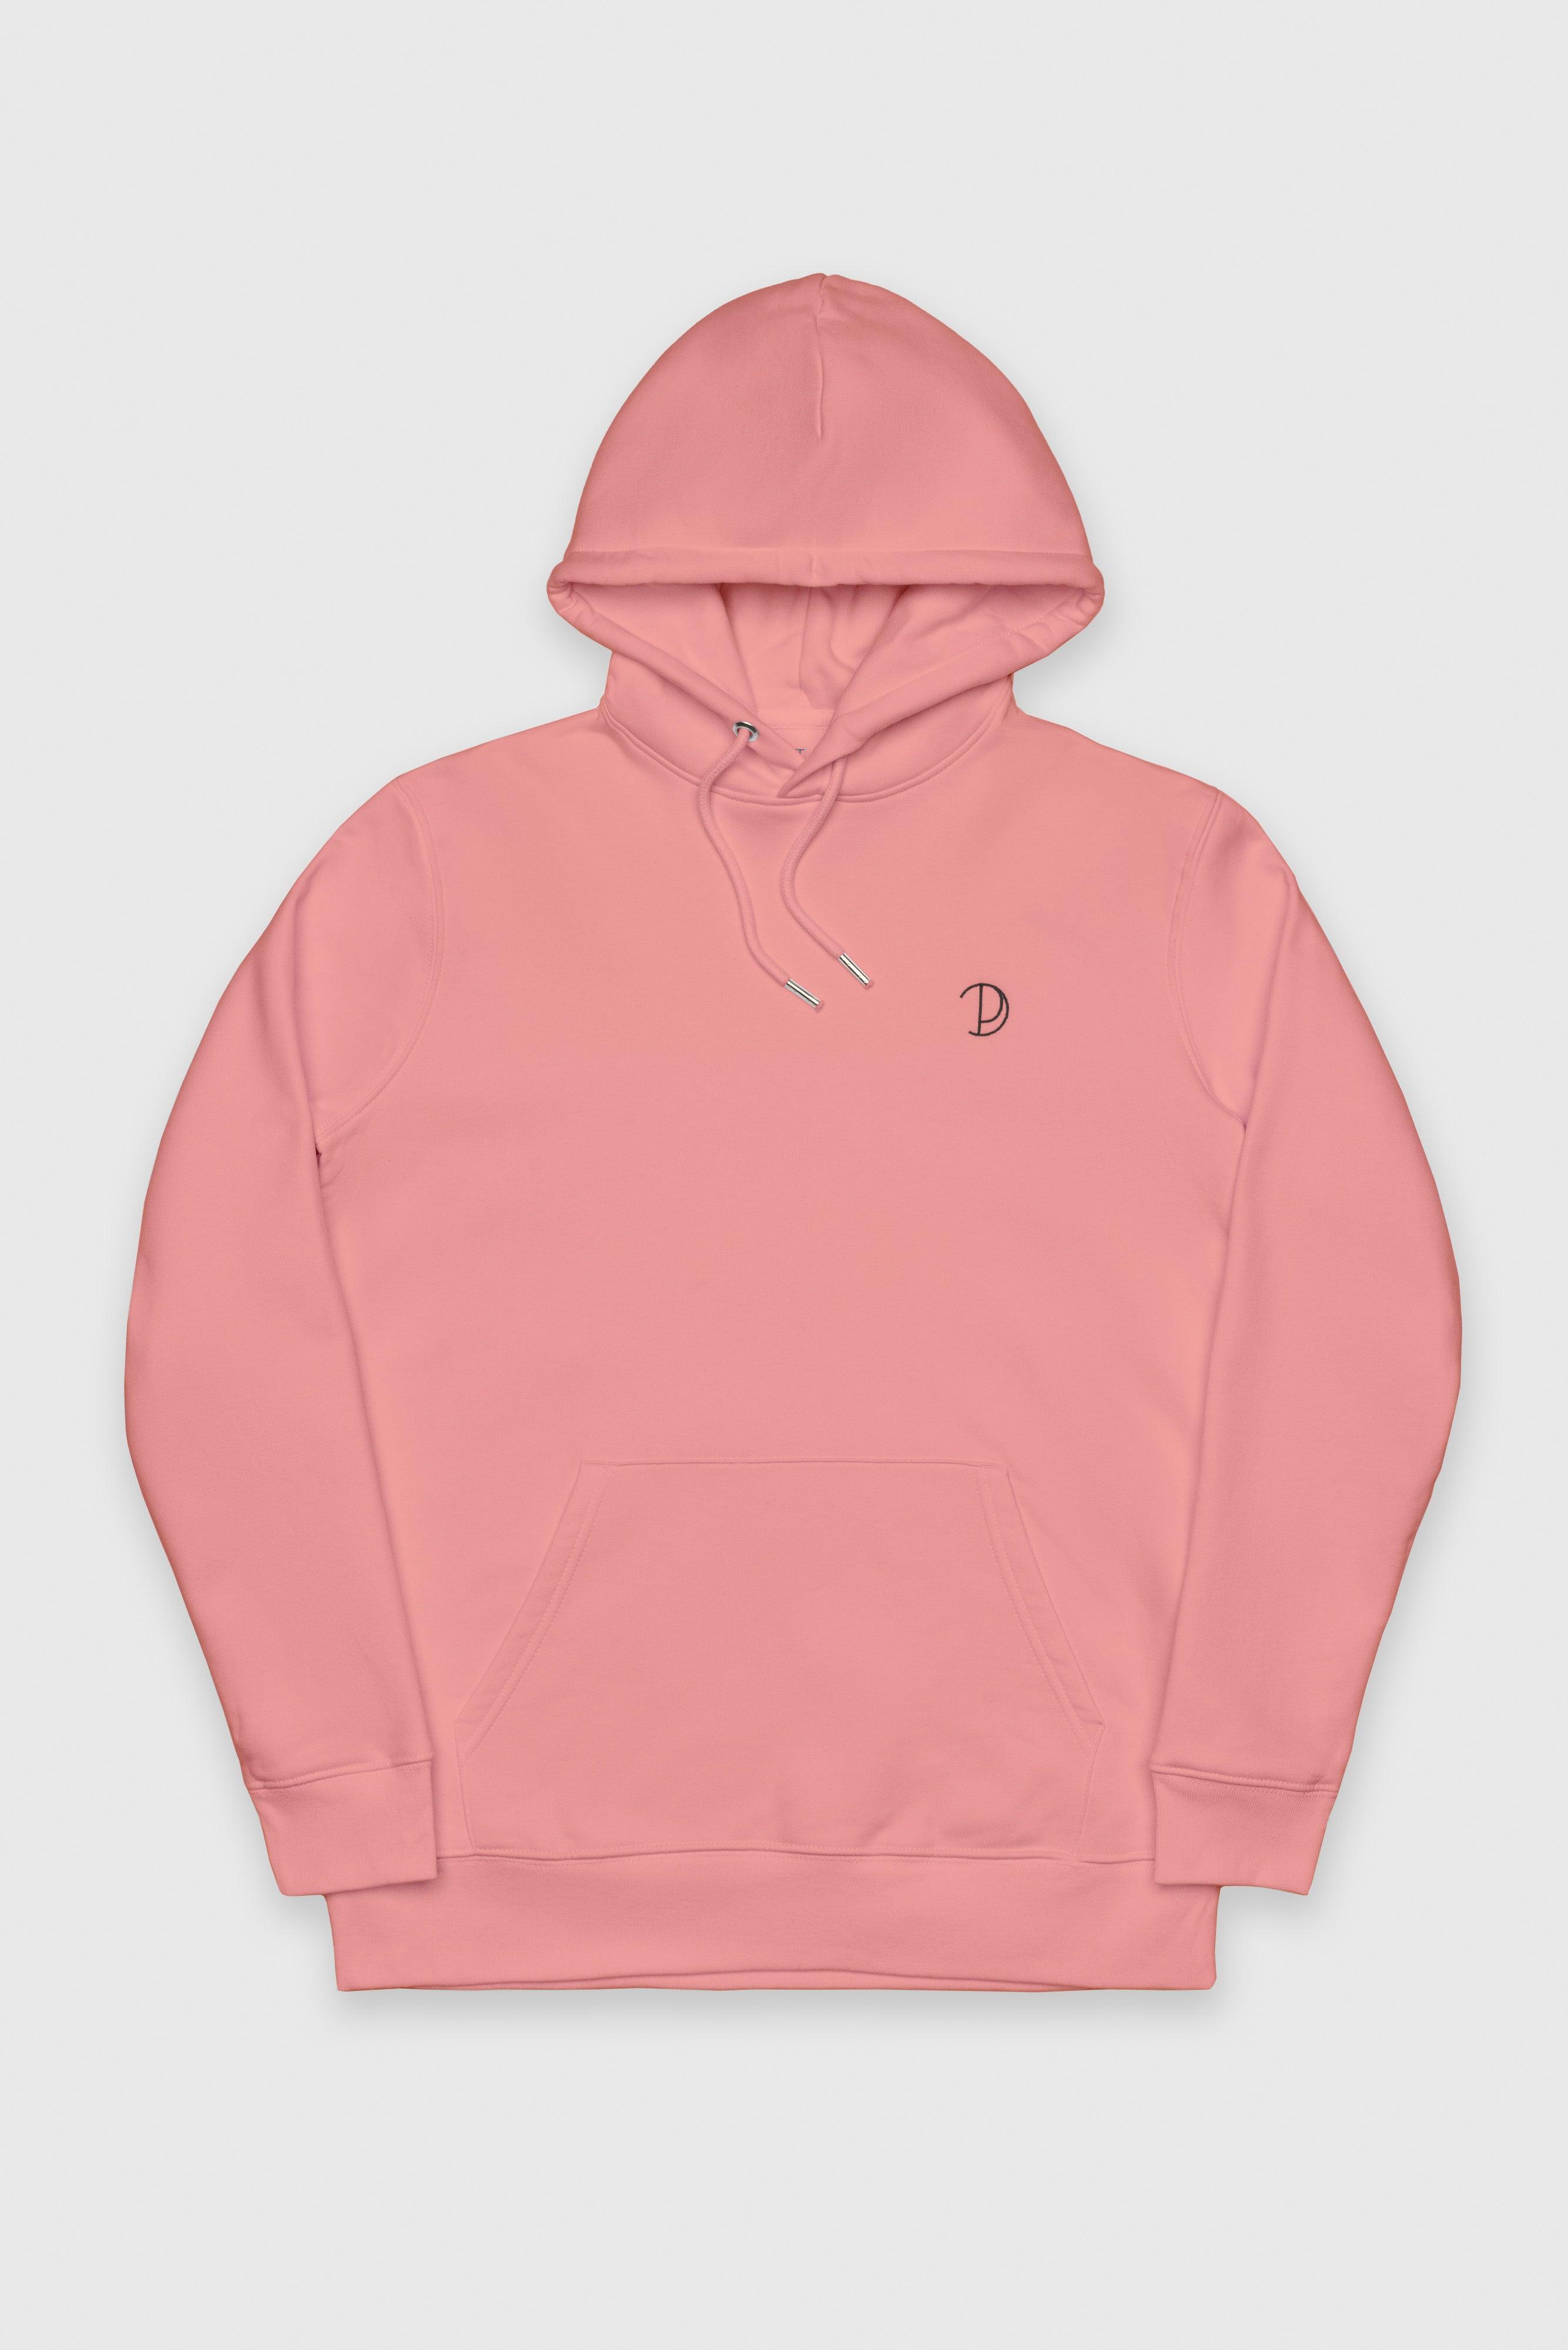 Product picture of Canyon Pink Embroidered Logo Hoodie